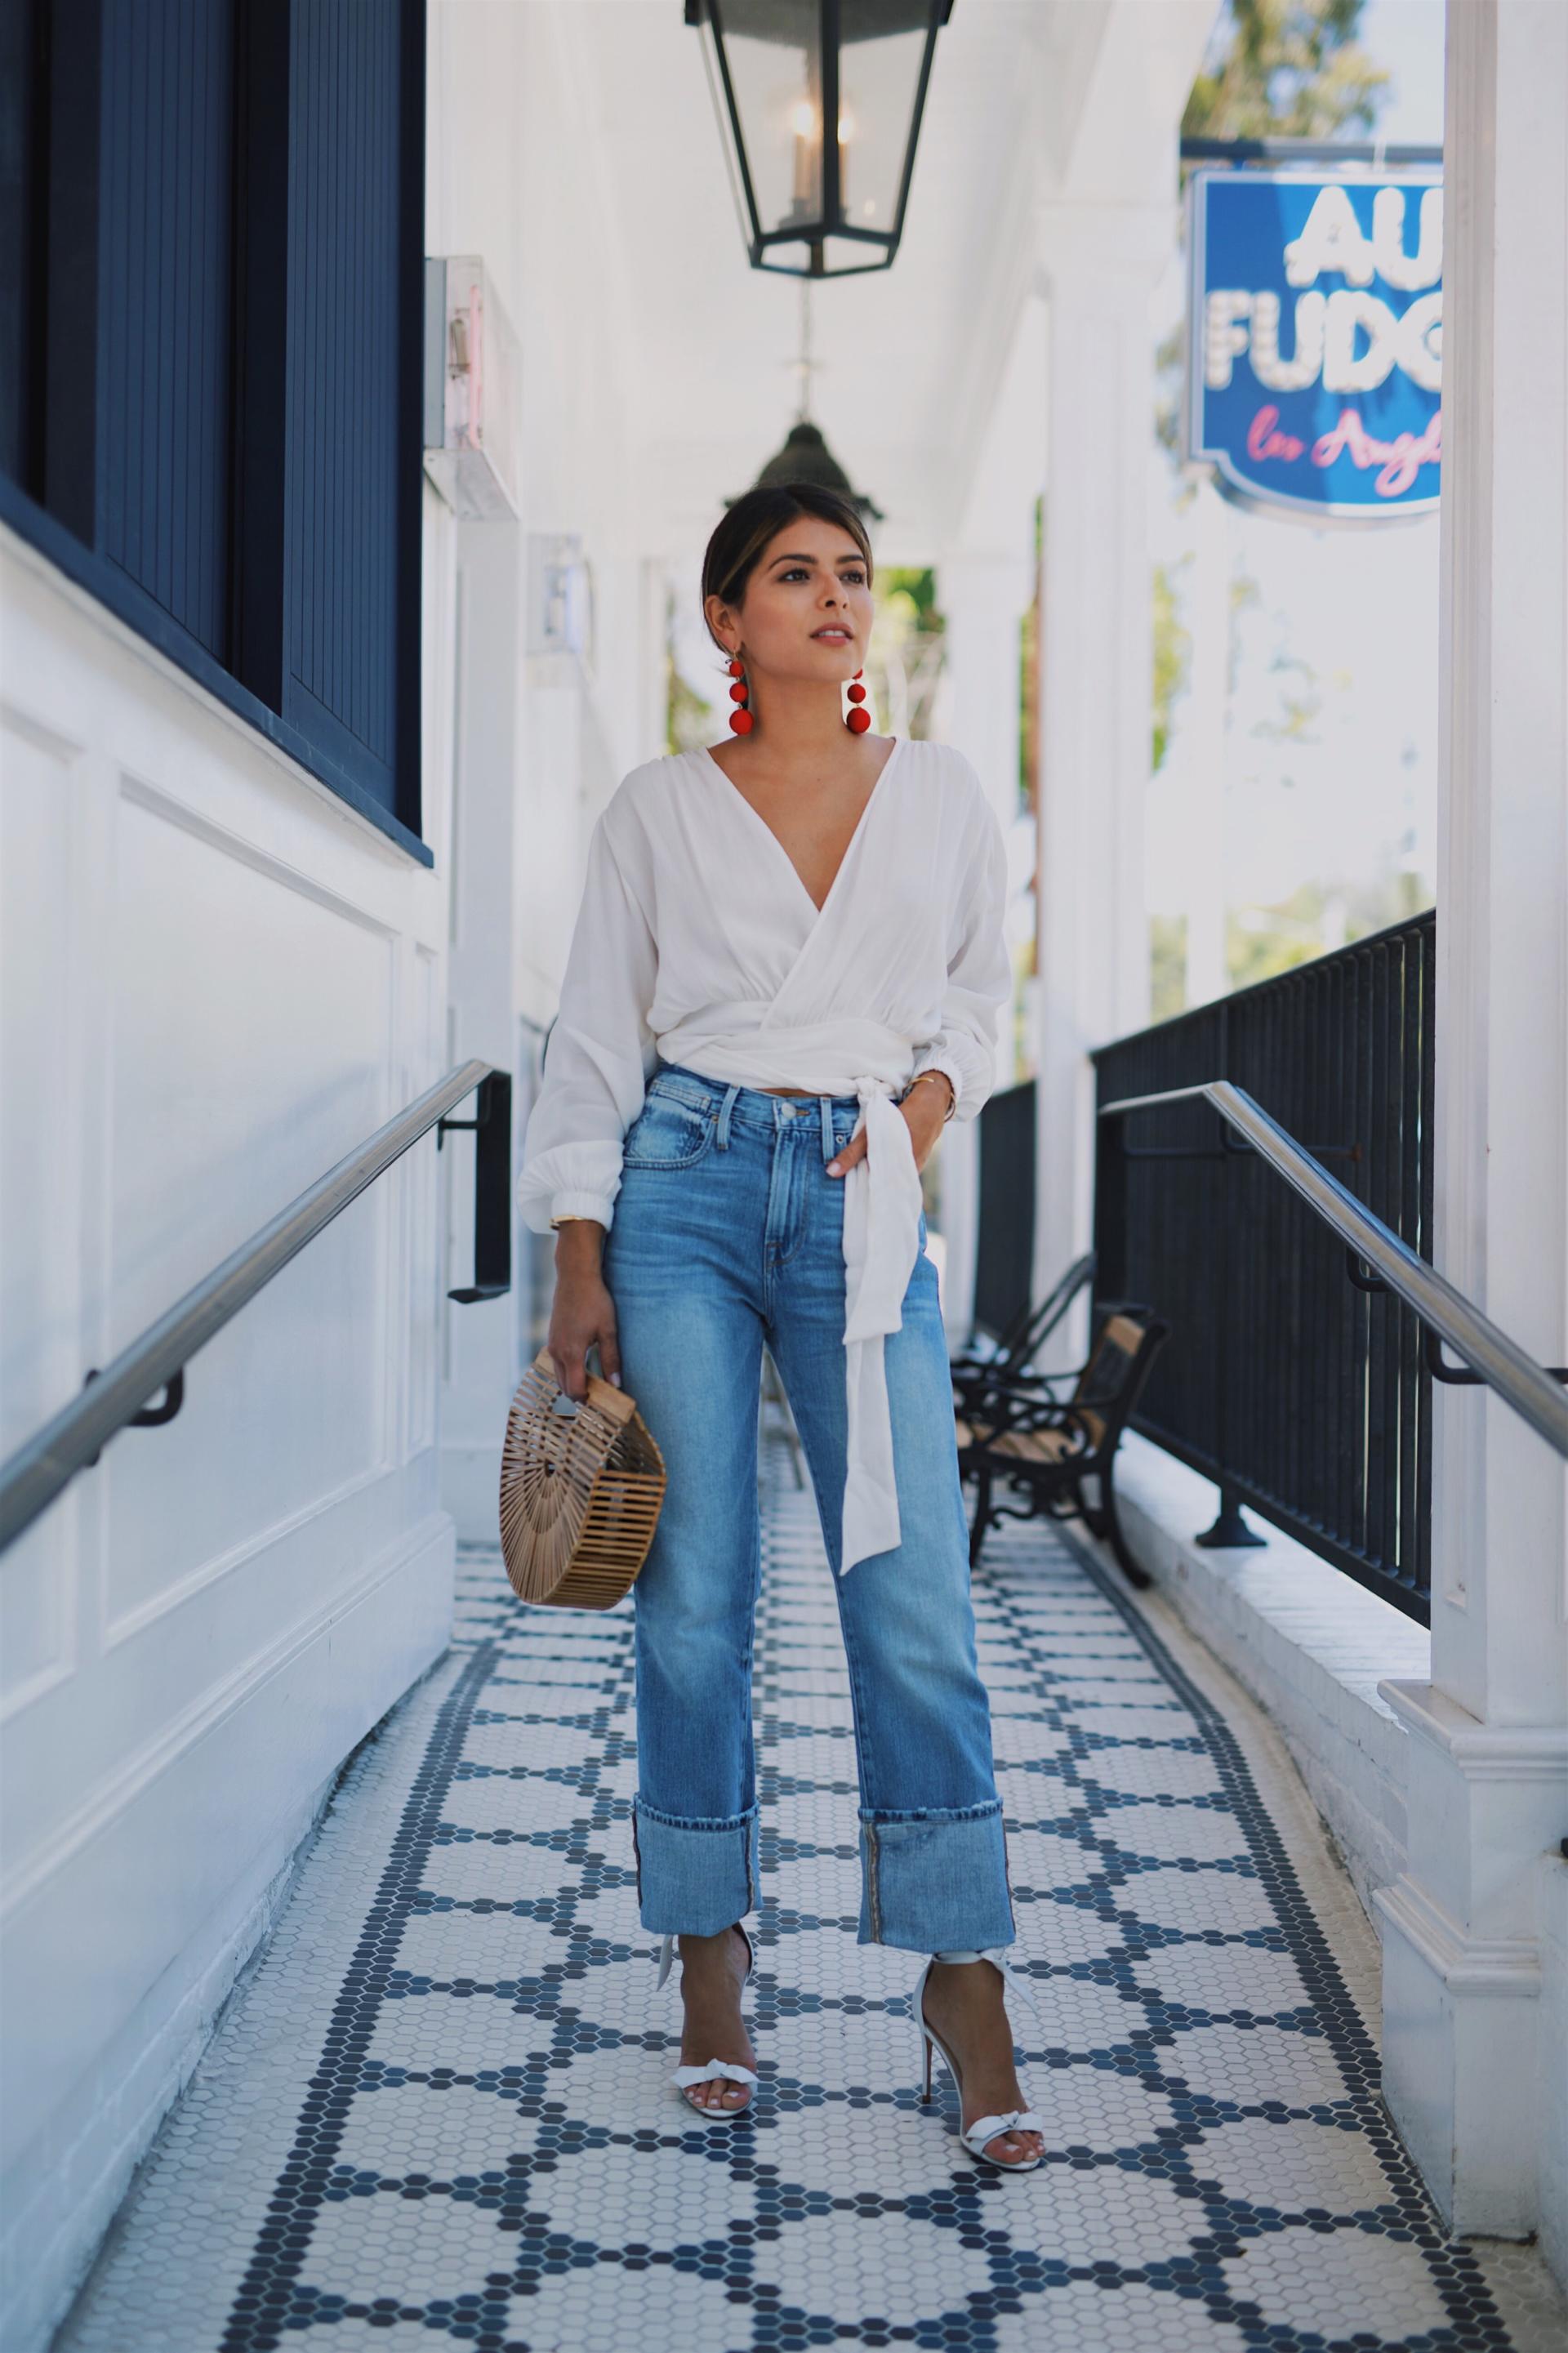 4 Chic Ways To Cuff Your Jeans - Lake Diary